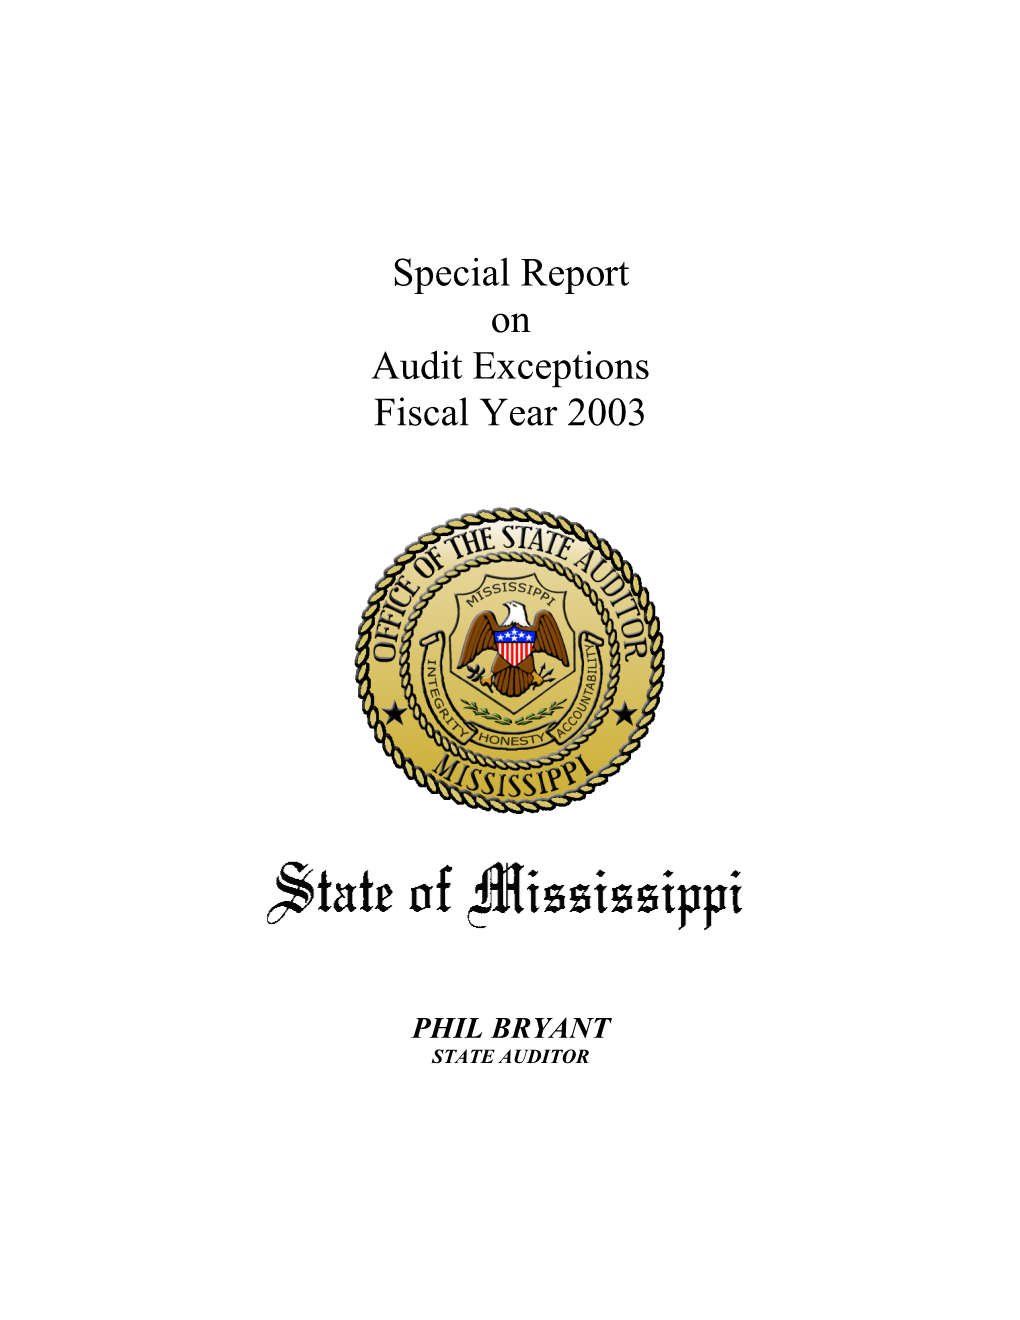 Special Report on Audit Exceptions Fiscal Year 2003